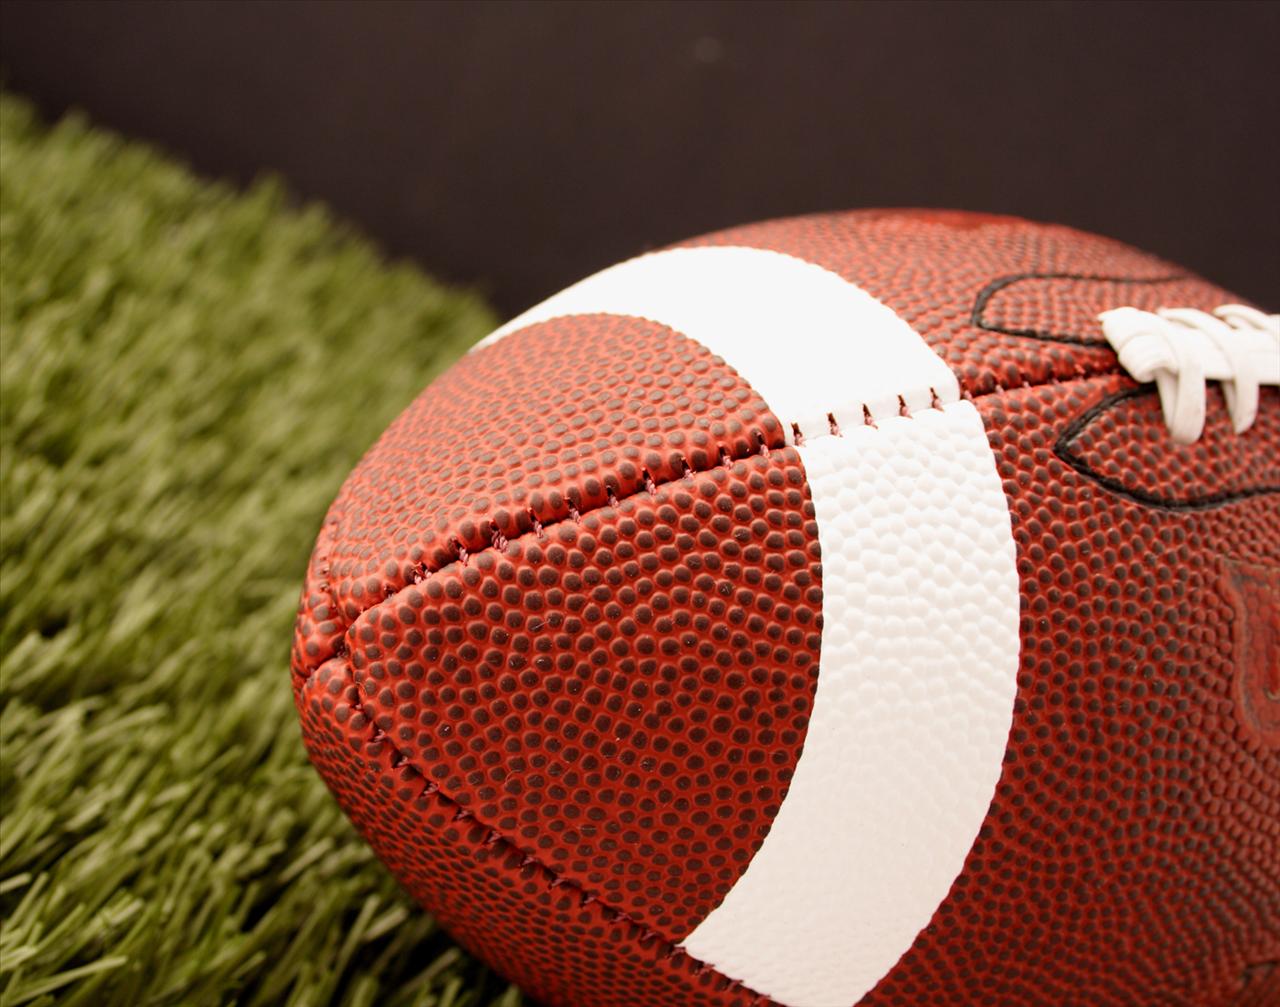 Football Up Close free powerpoint background